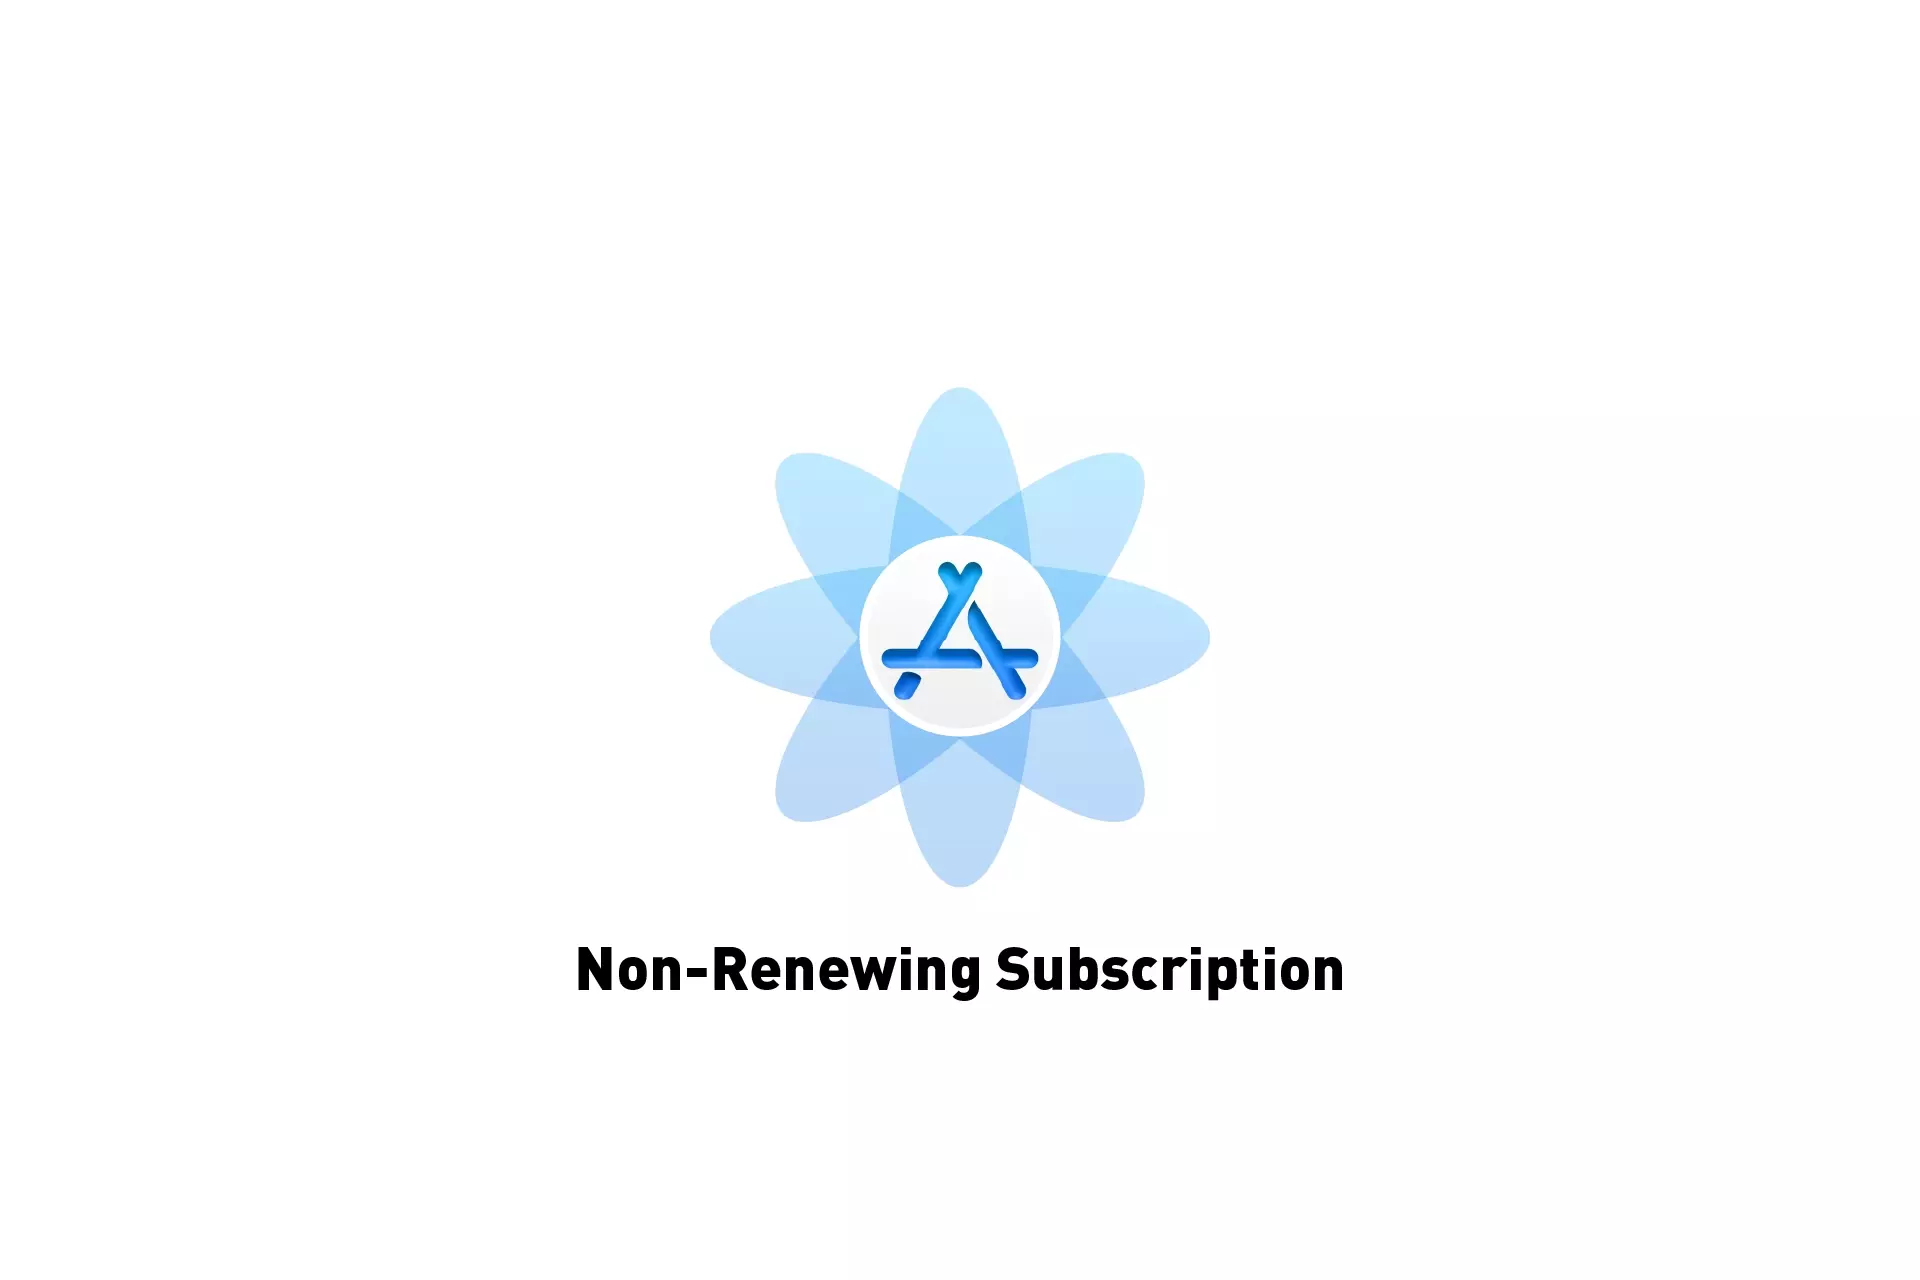 A flower that represents App Store Connect with the text "Non-Renewable Subscriptions" beneath it.